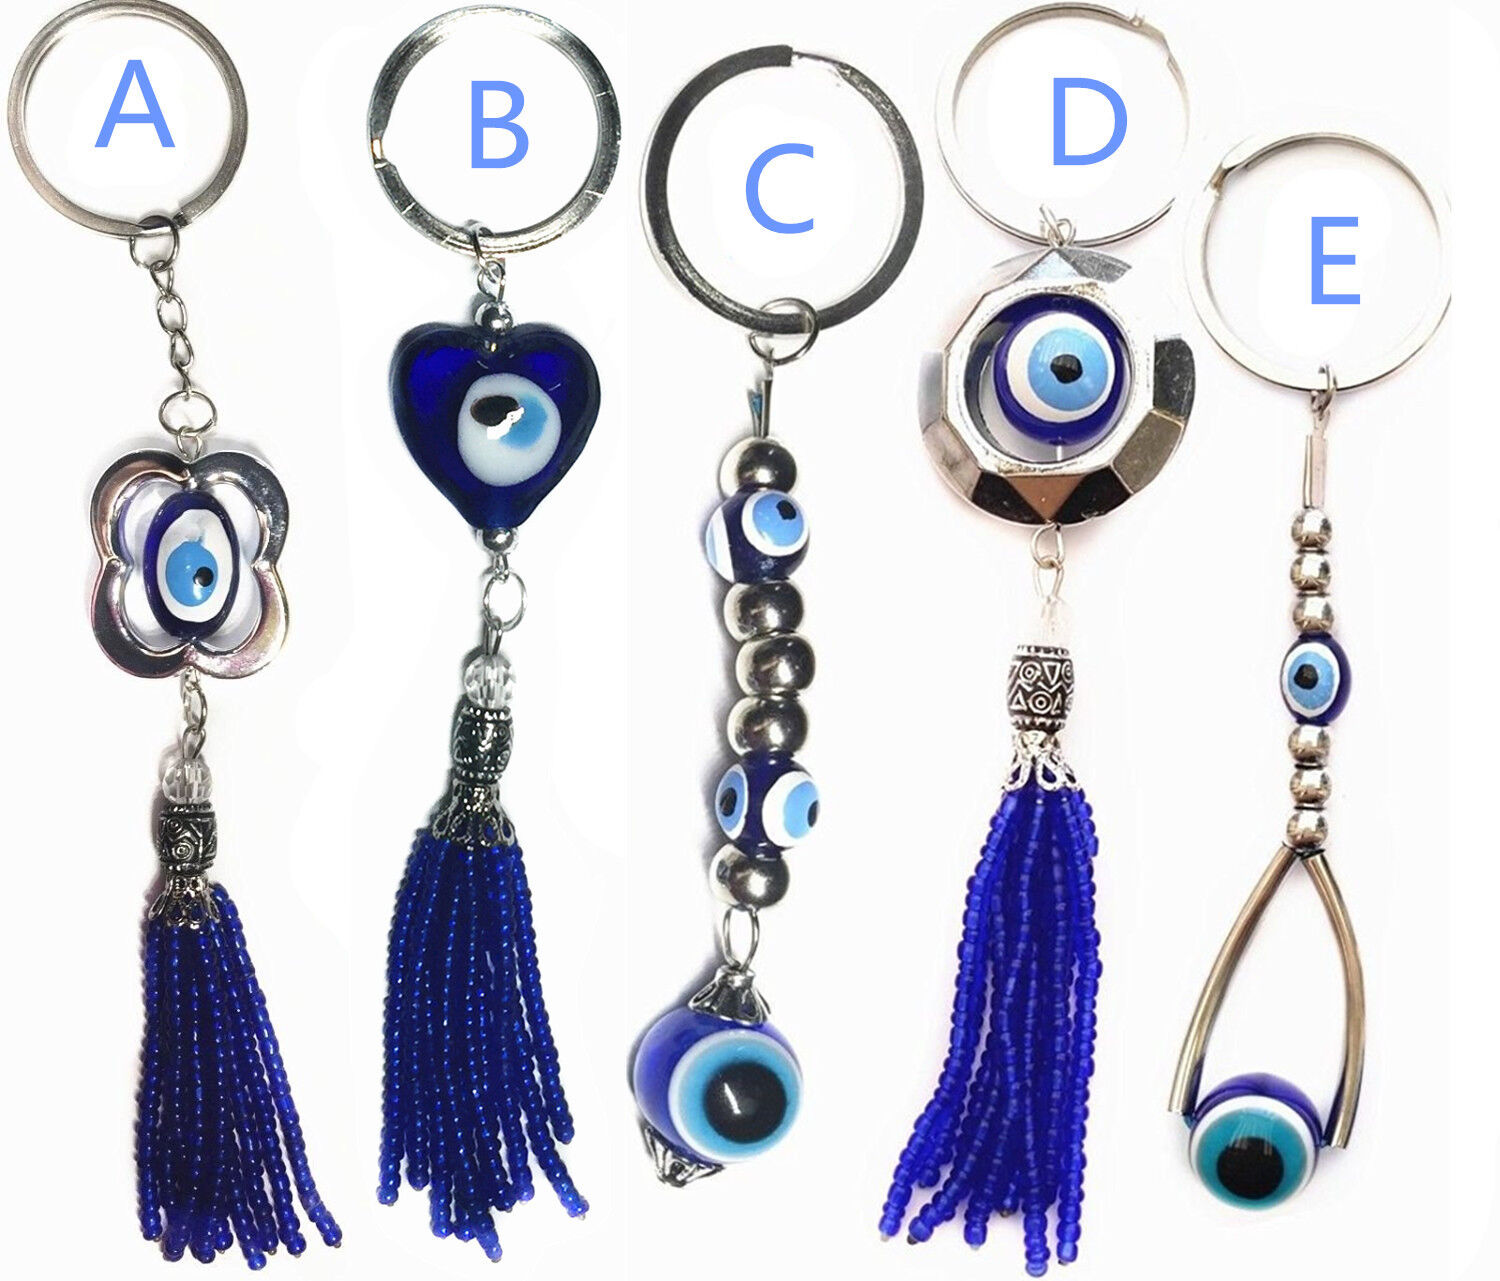 5 of  Blue Hamsa Evil Eye key chain ring amulet hanging ornament for protection